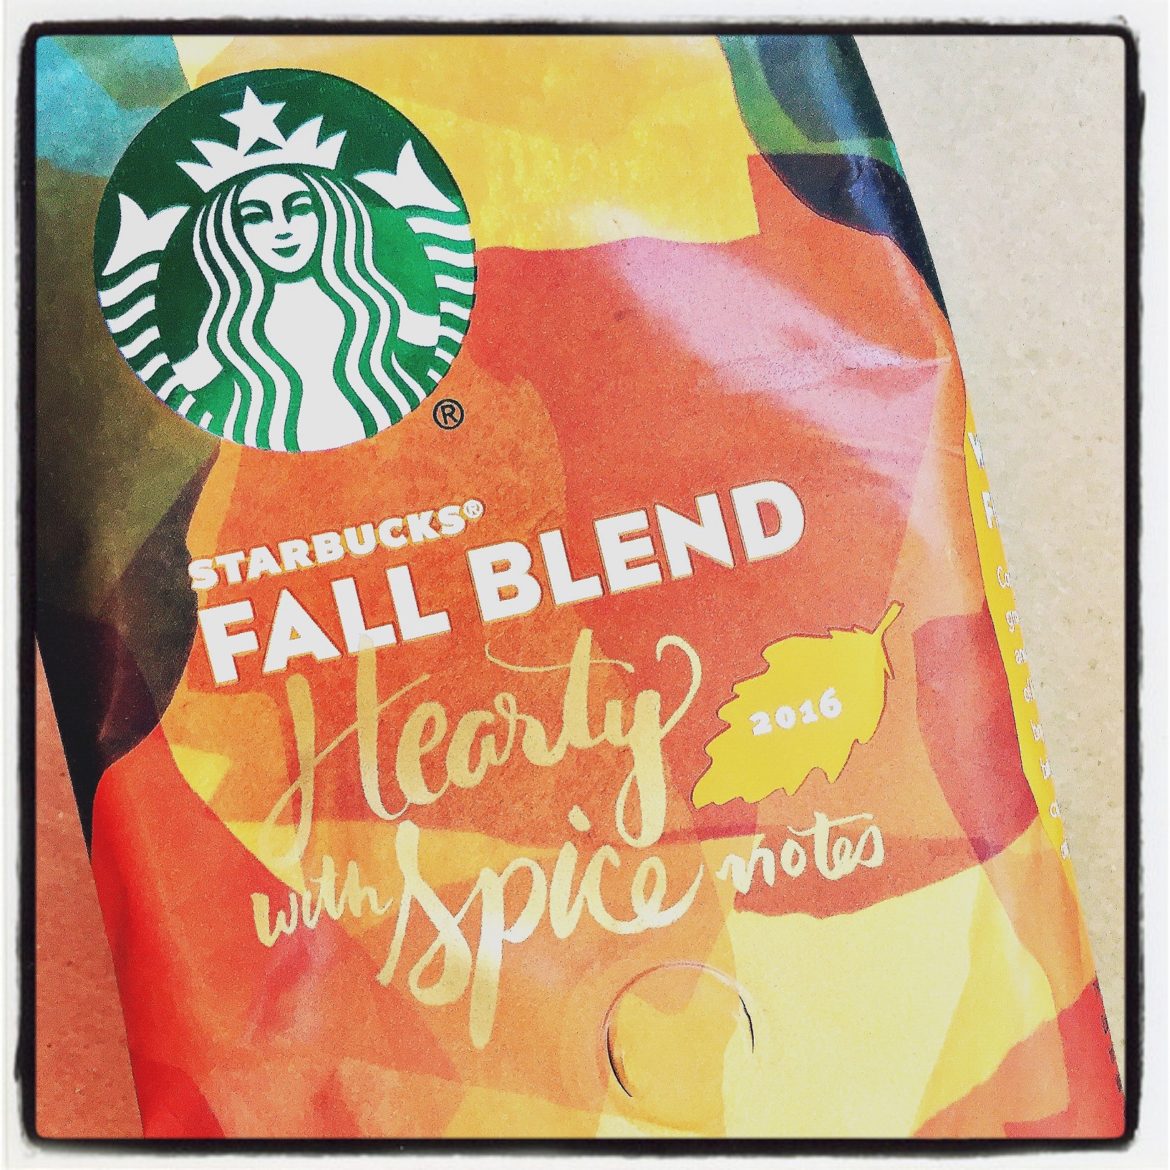 Lots of people don’t know about Fall Blend. It’s an unknown Starbucks gem.